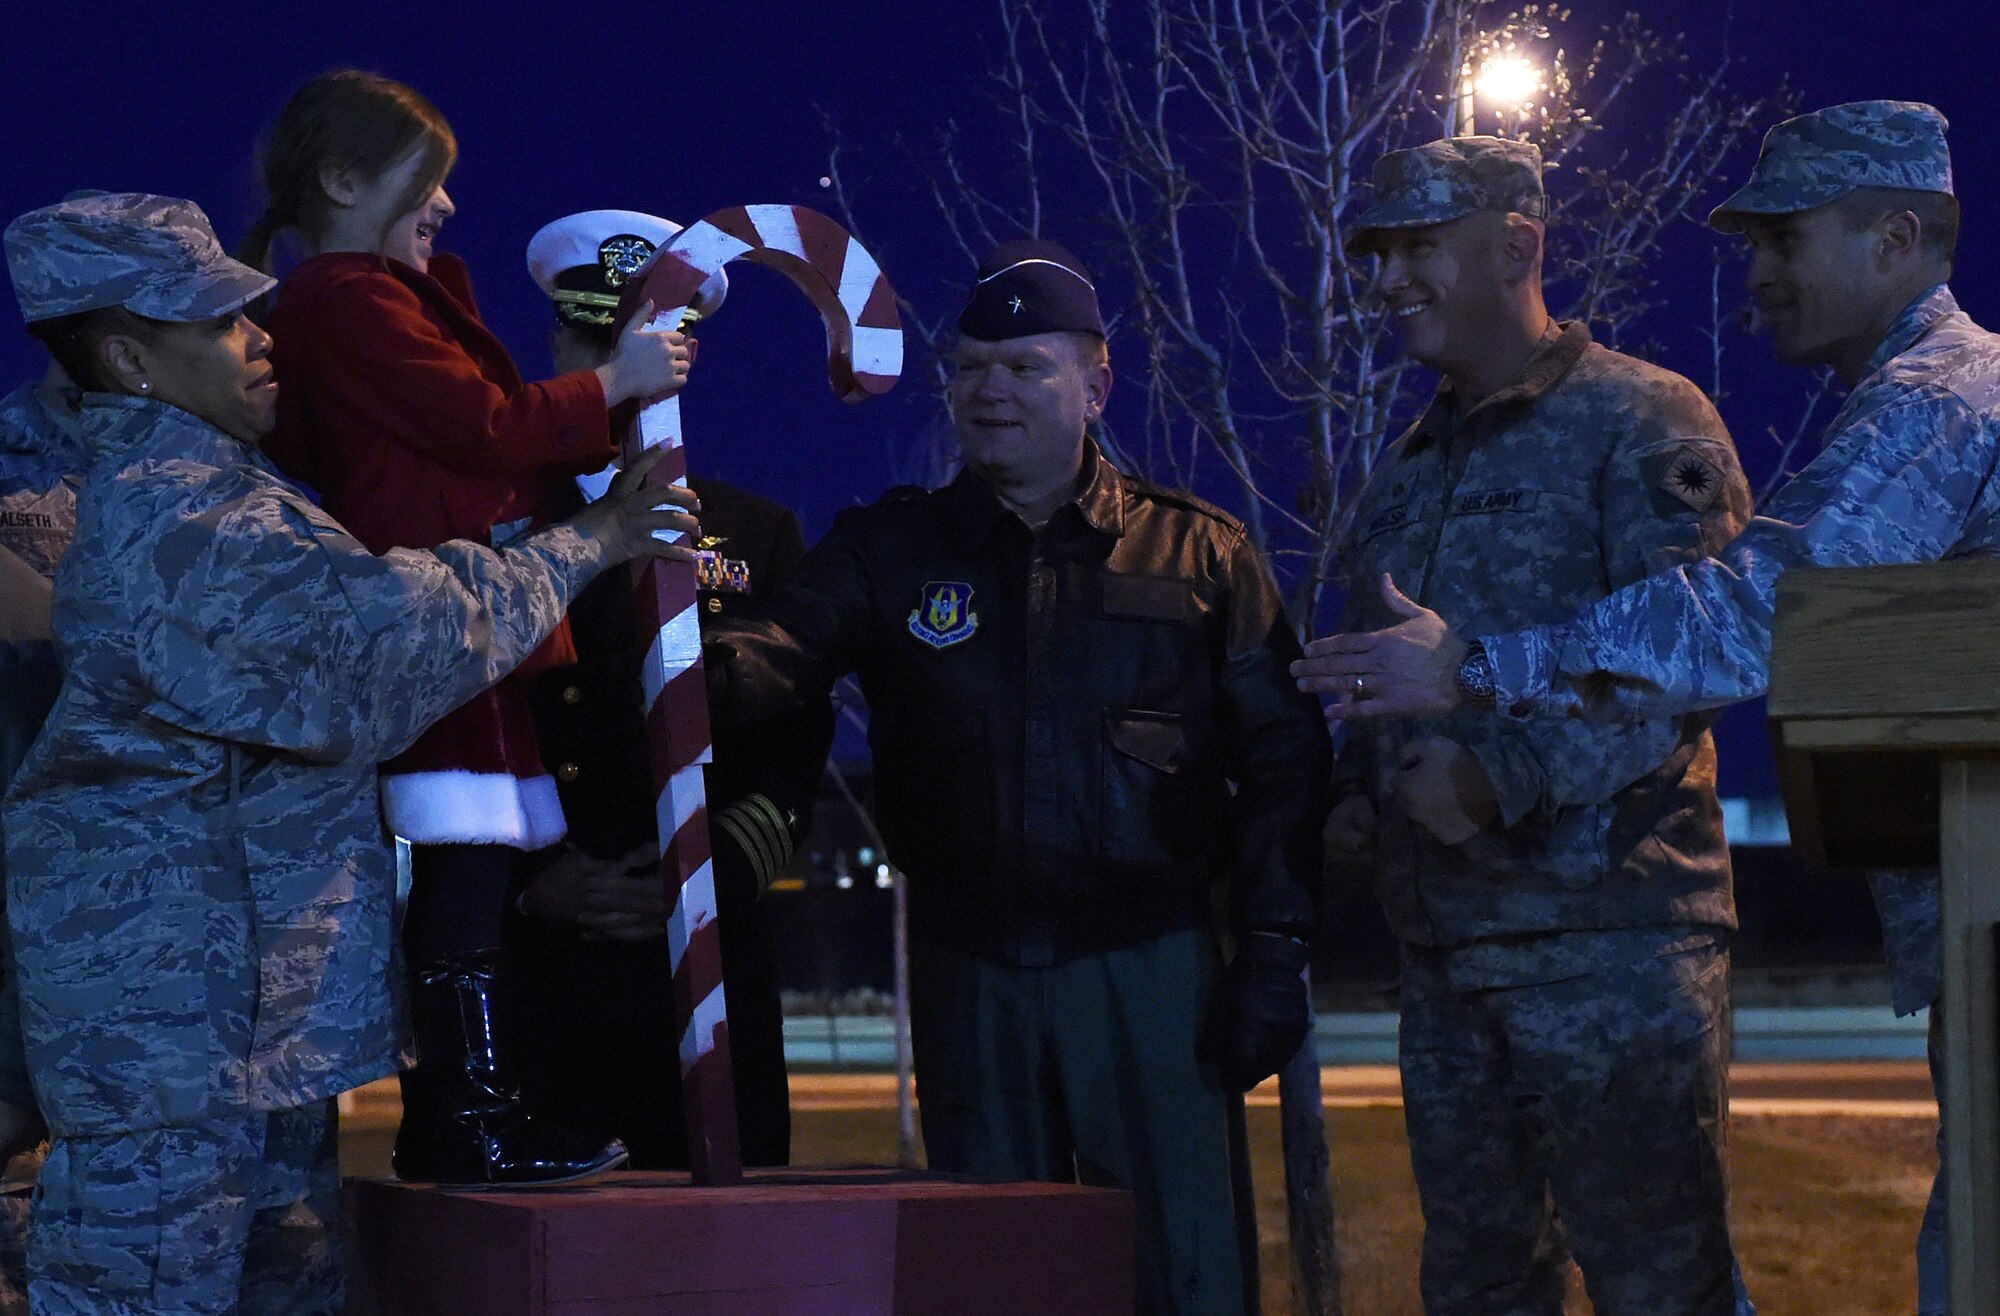 A 460th Space Wing ‘panther cub’ helps Team Buckley commanders and chiefs flip the switch to light the base tree during a tree-lighting ceremony Dec. 9, 2014, at the 460th SW headquarters building on Buckley Air Force Base, Colo. The annual tree lighting concluded with a visit from the 460th SW mascot, Buck Lee, dressed as Santa Claus, as well as hot chocolate and cookies. (U.S. Air Force photo by Airman 1st Class Samantha Saulsbury/Released)